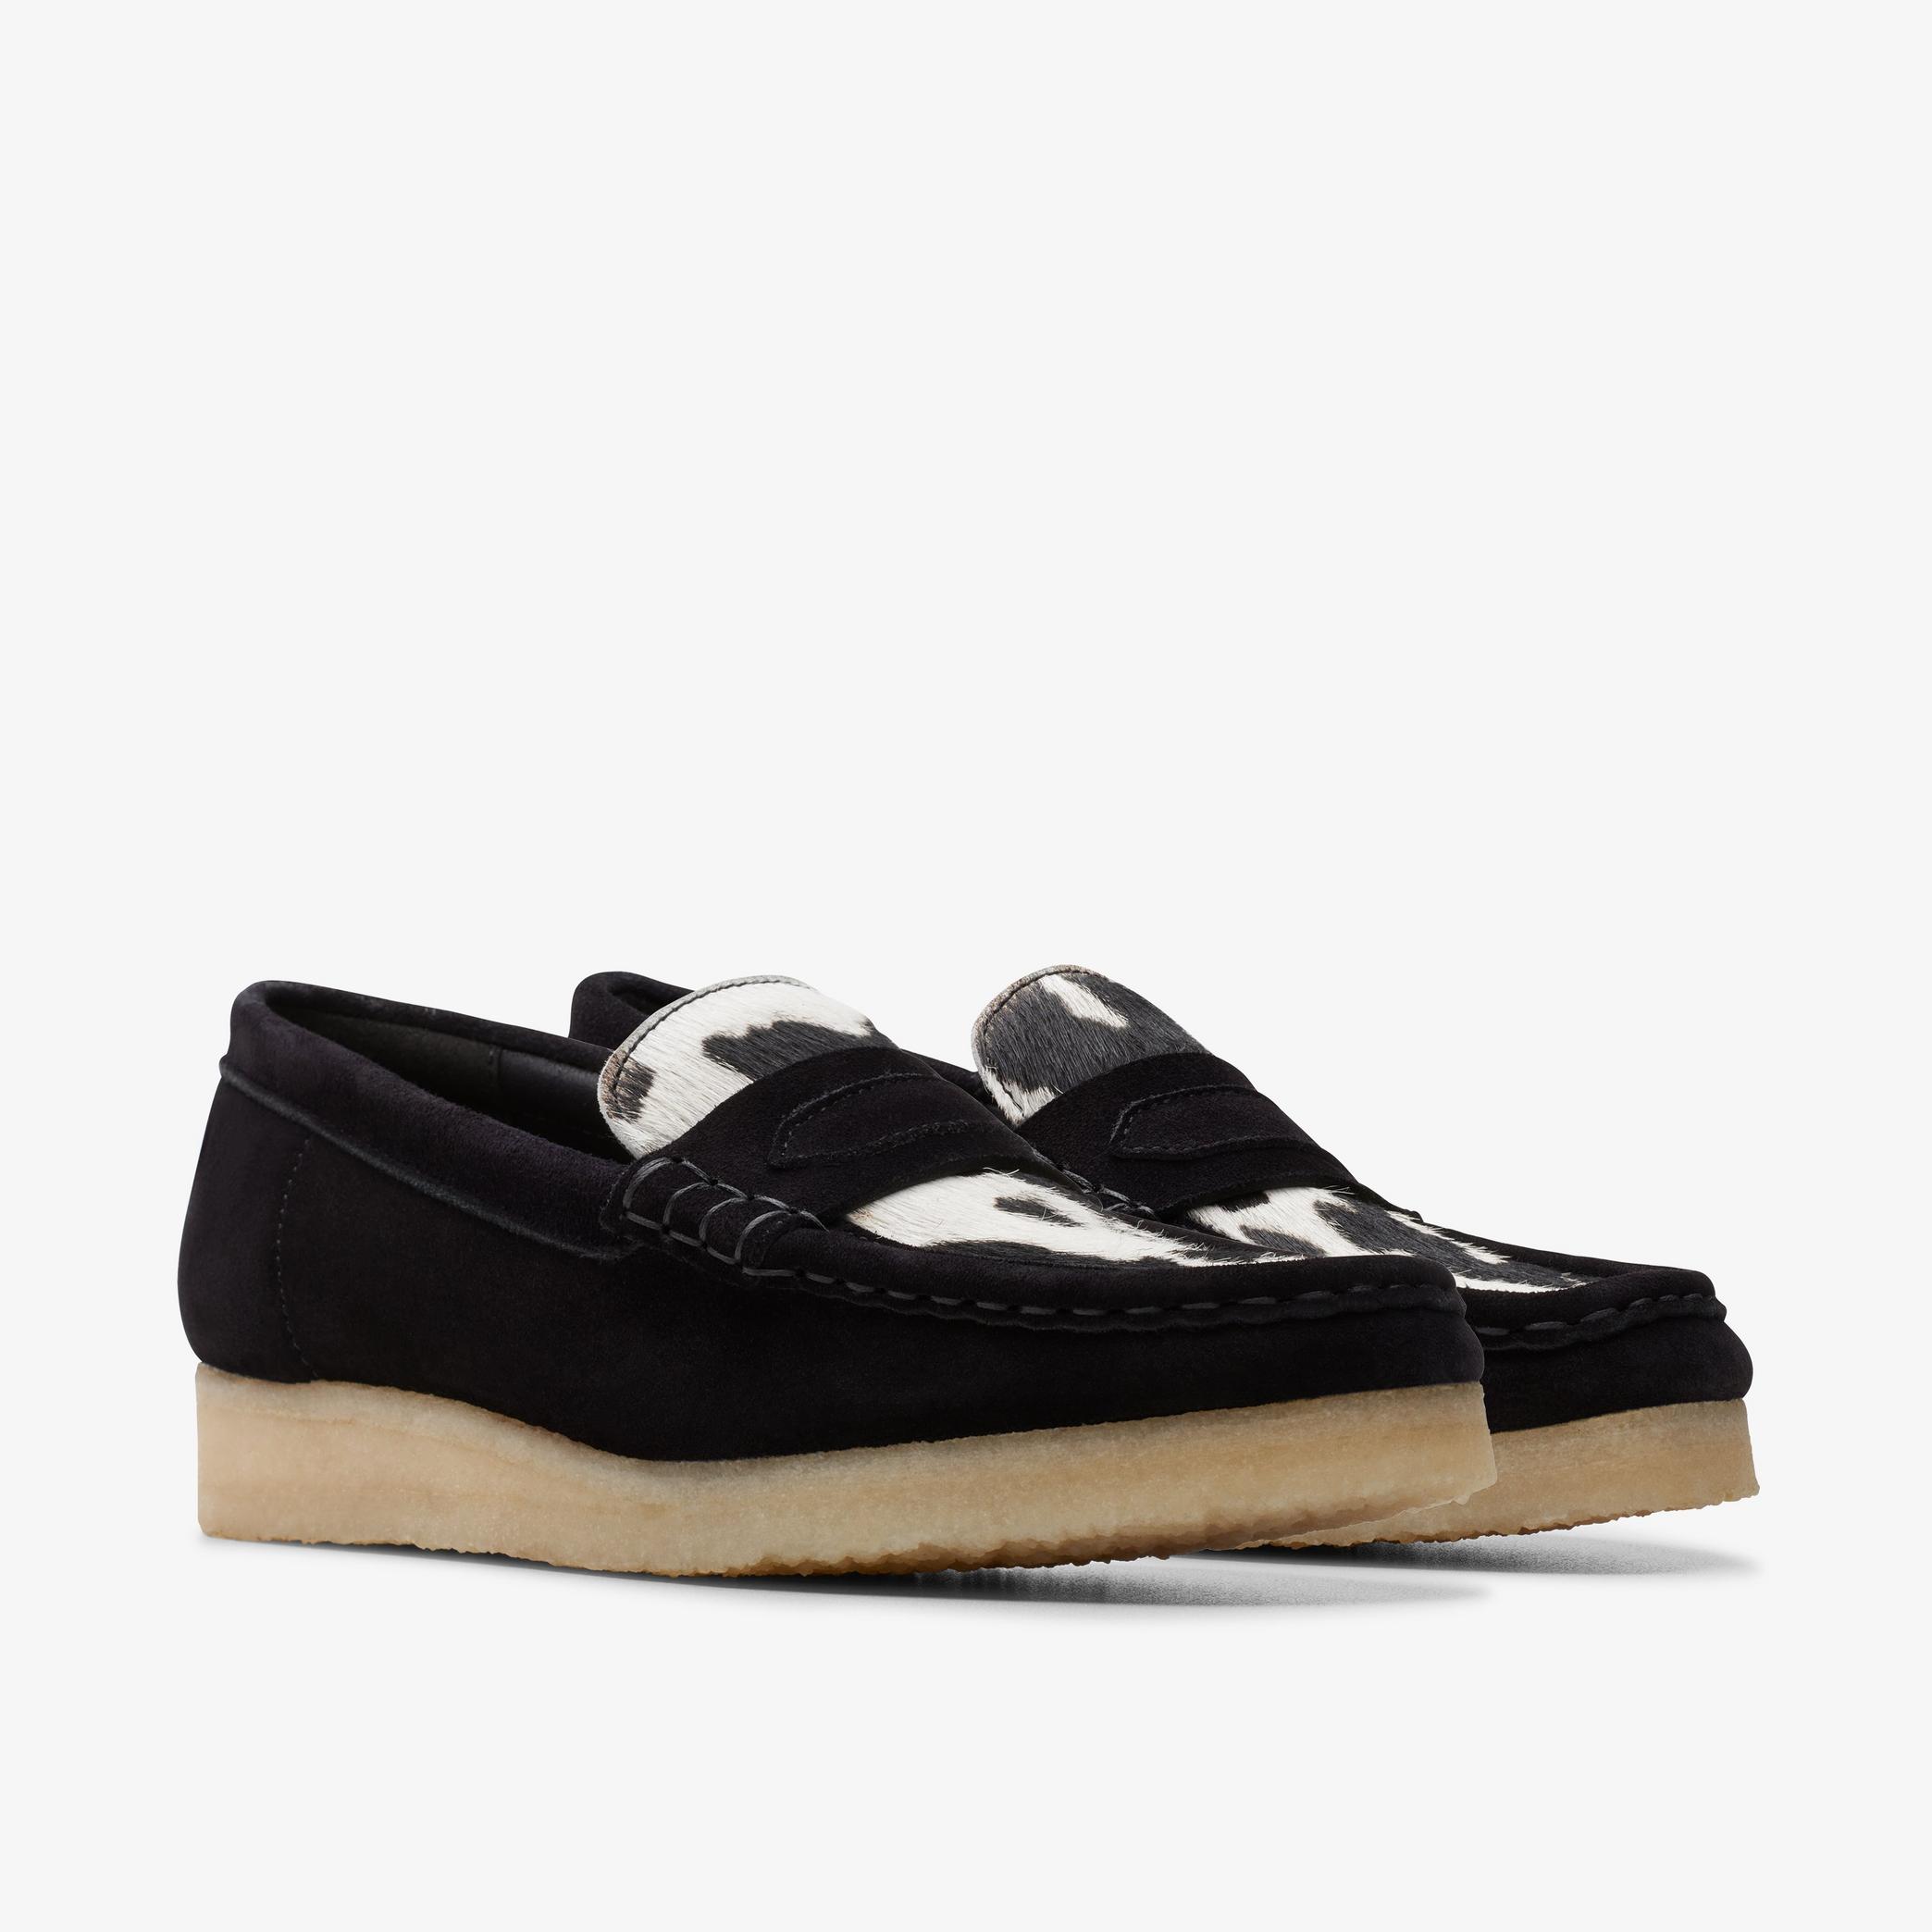 Wallabee Loafer Cow Print HairOn Loafers, view 4 of 7